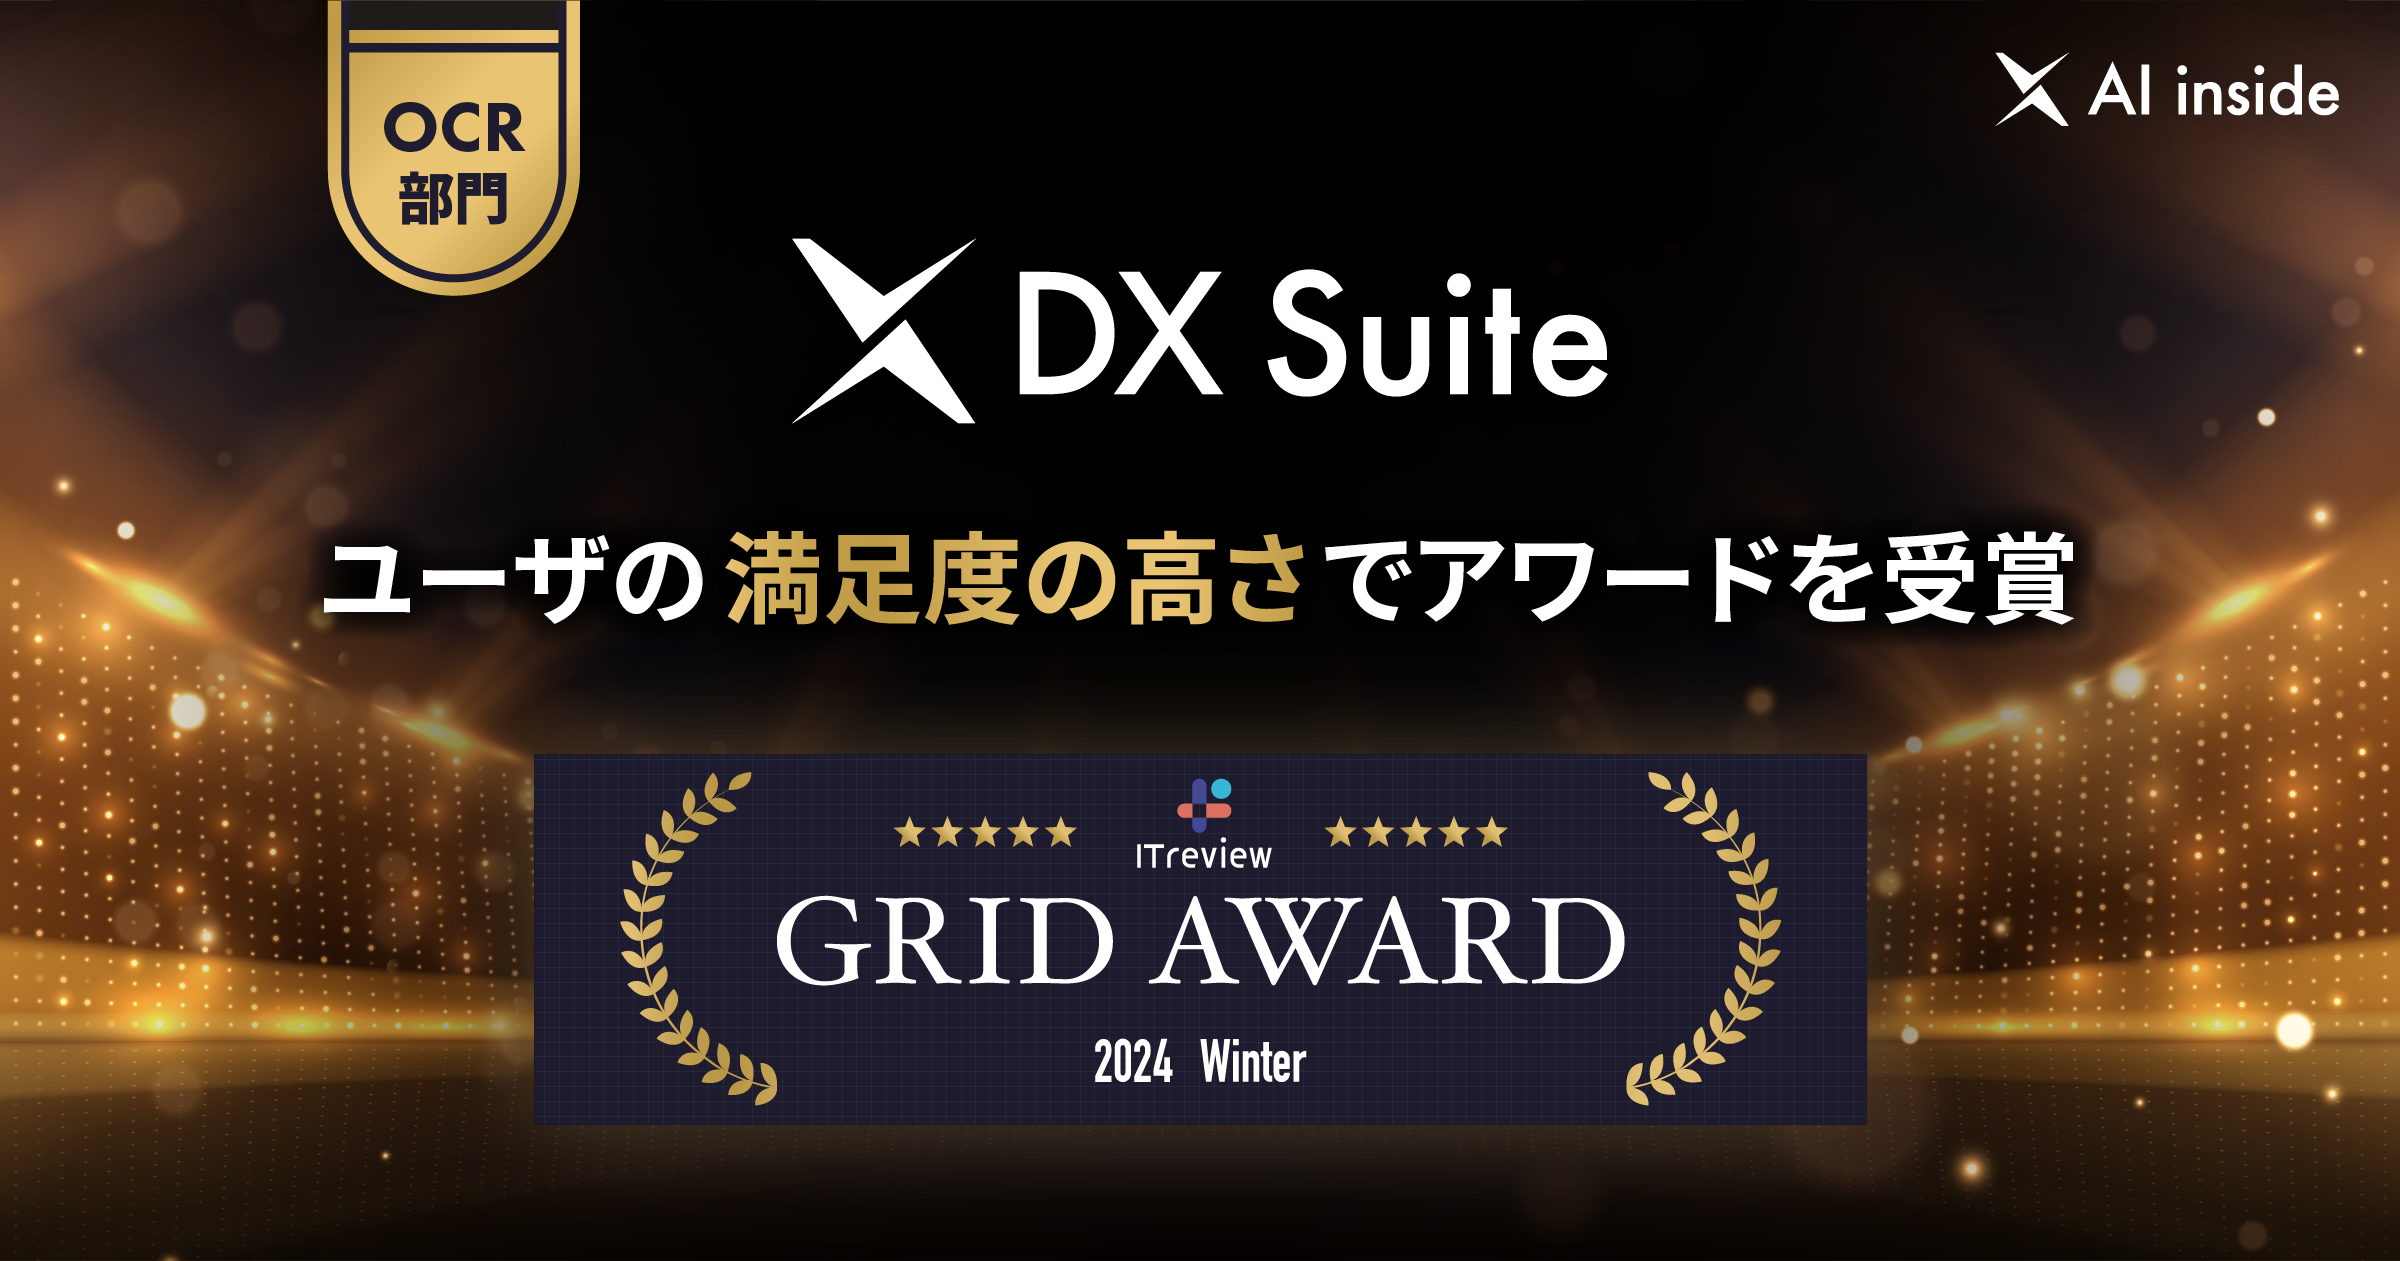 ITreview Grid Award 2024 Winter にて、ユーザーの満足度の高さで「High Performer」を6期連続で受賞